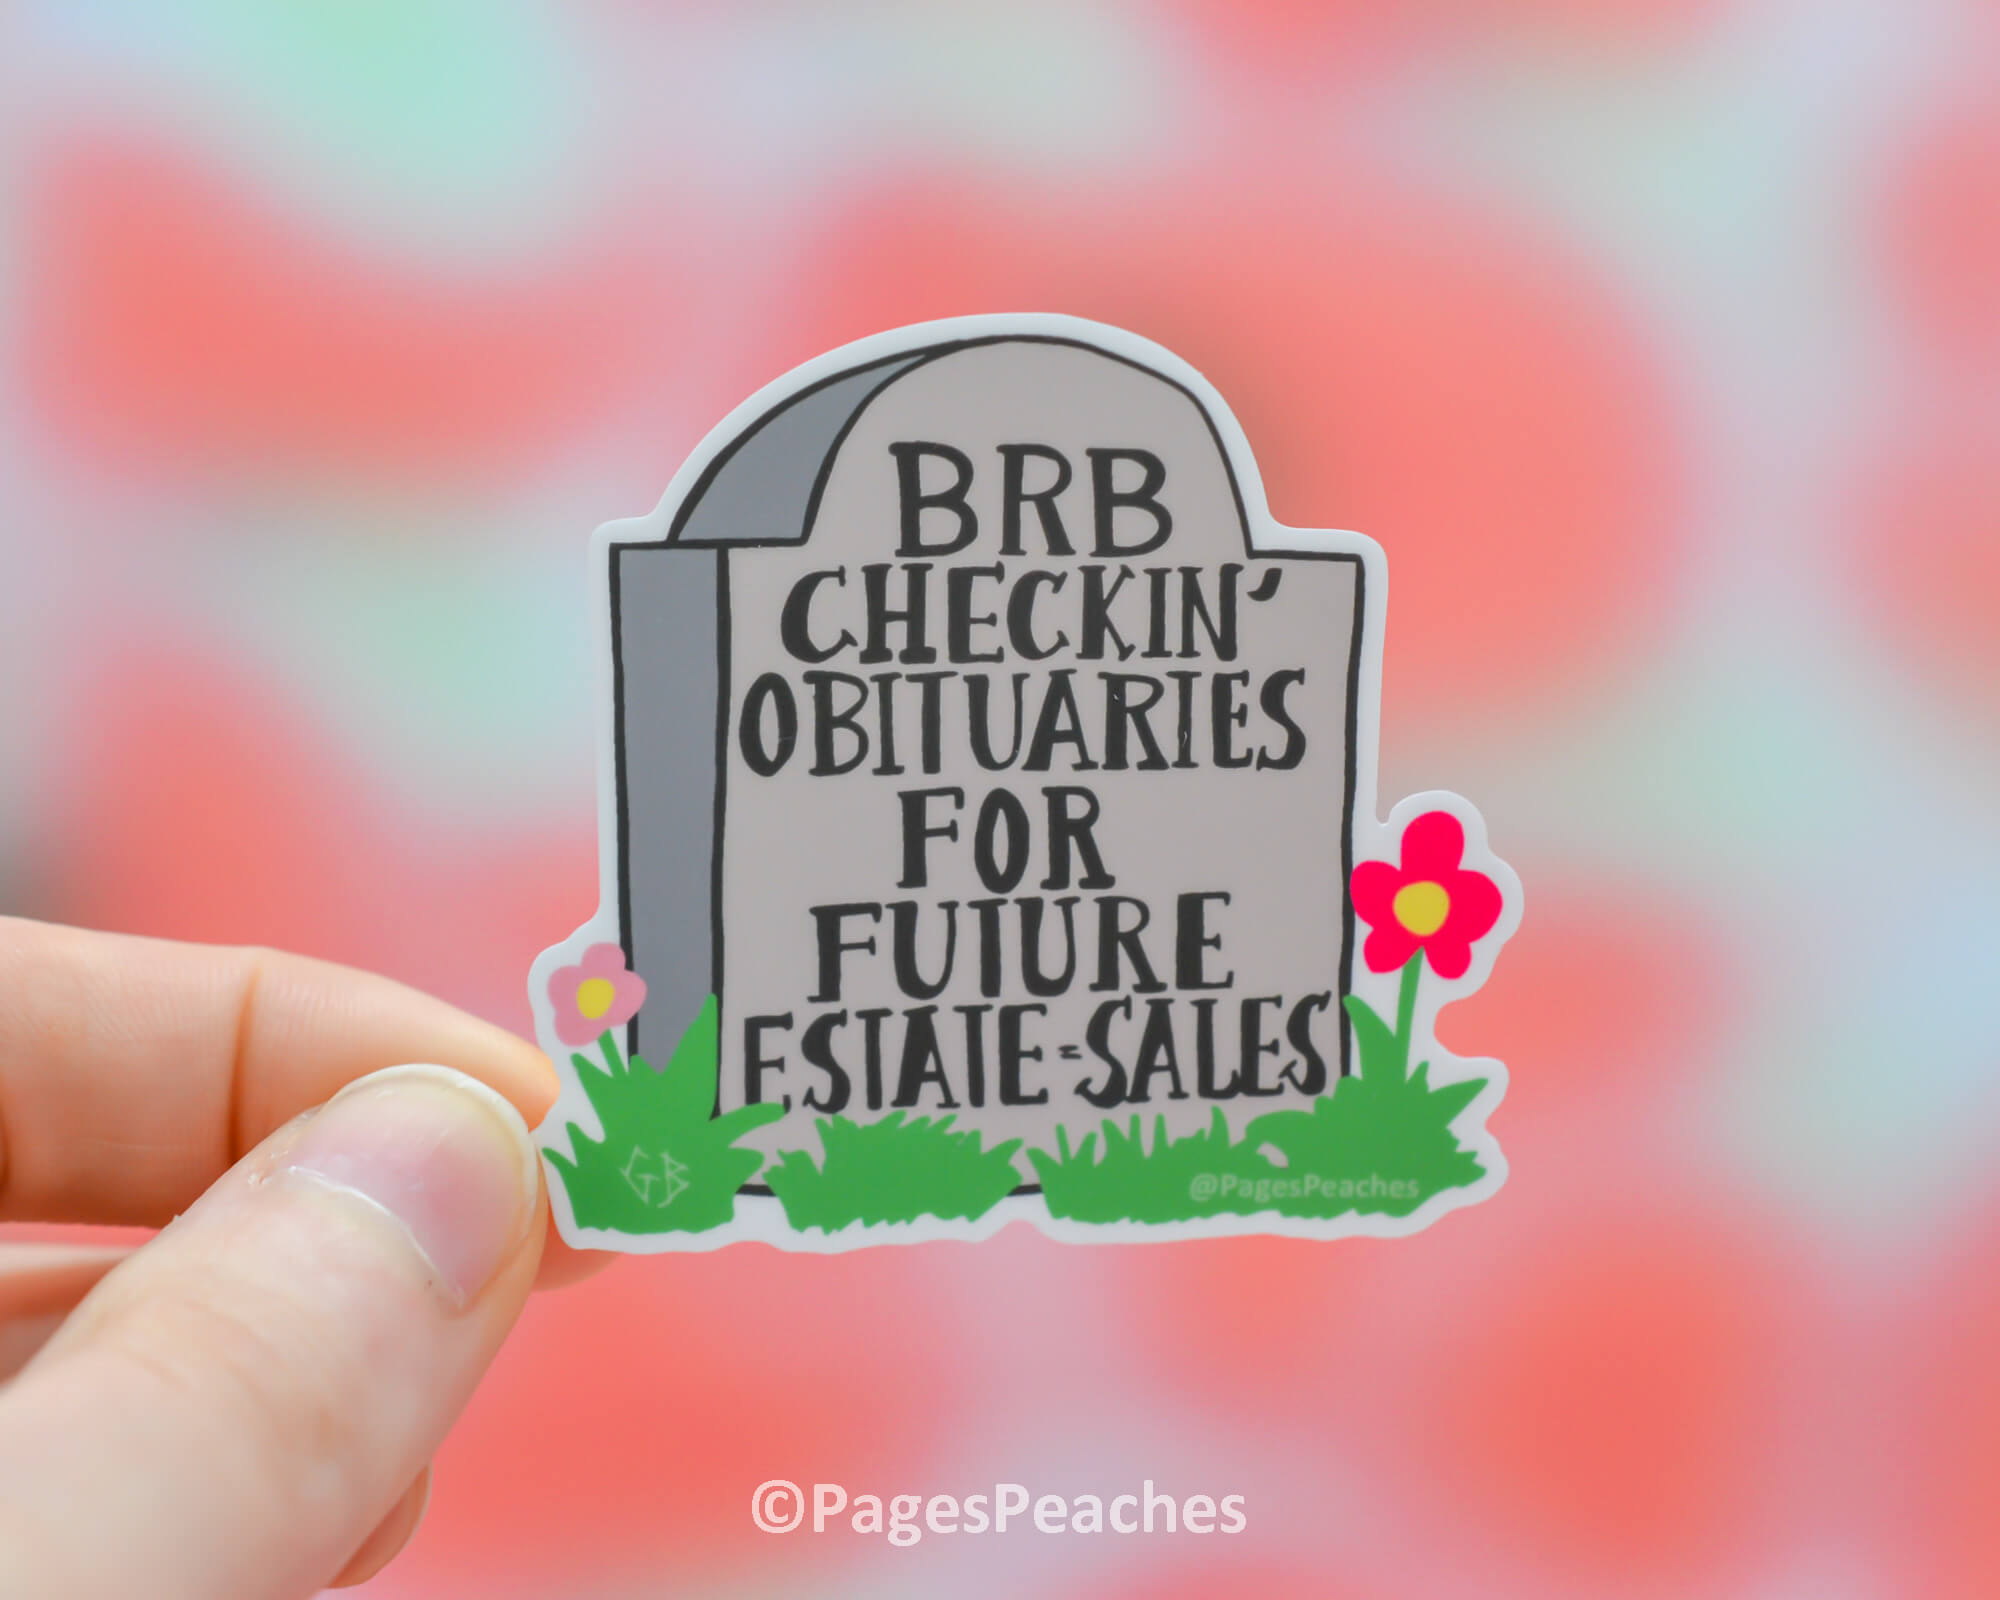 A waterproof sticker of a gravestone that says BRB checkin obituaries for future Estate Sales